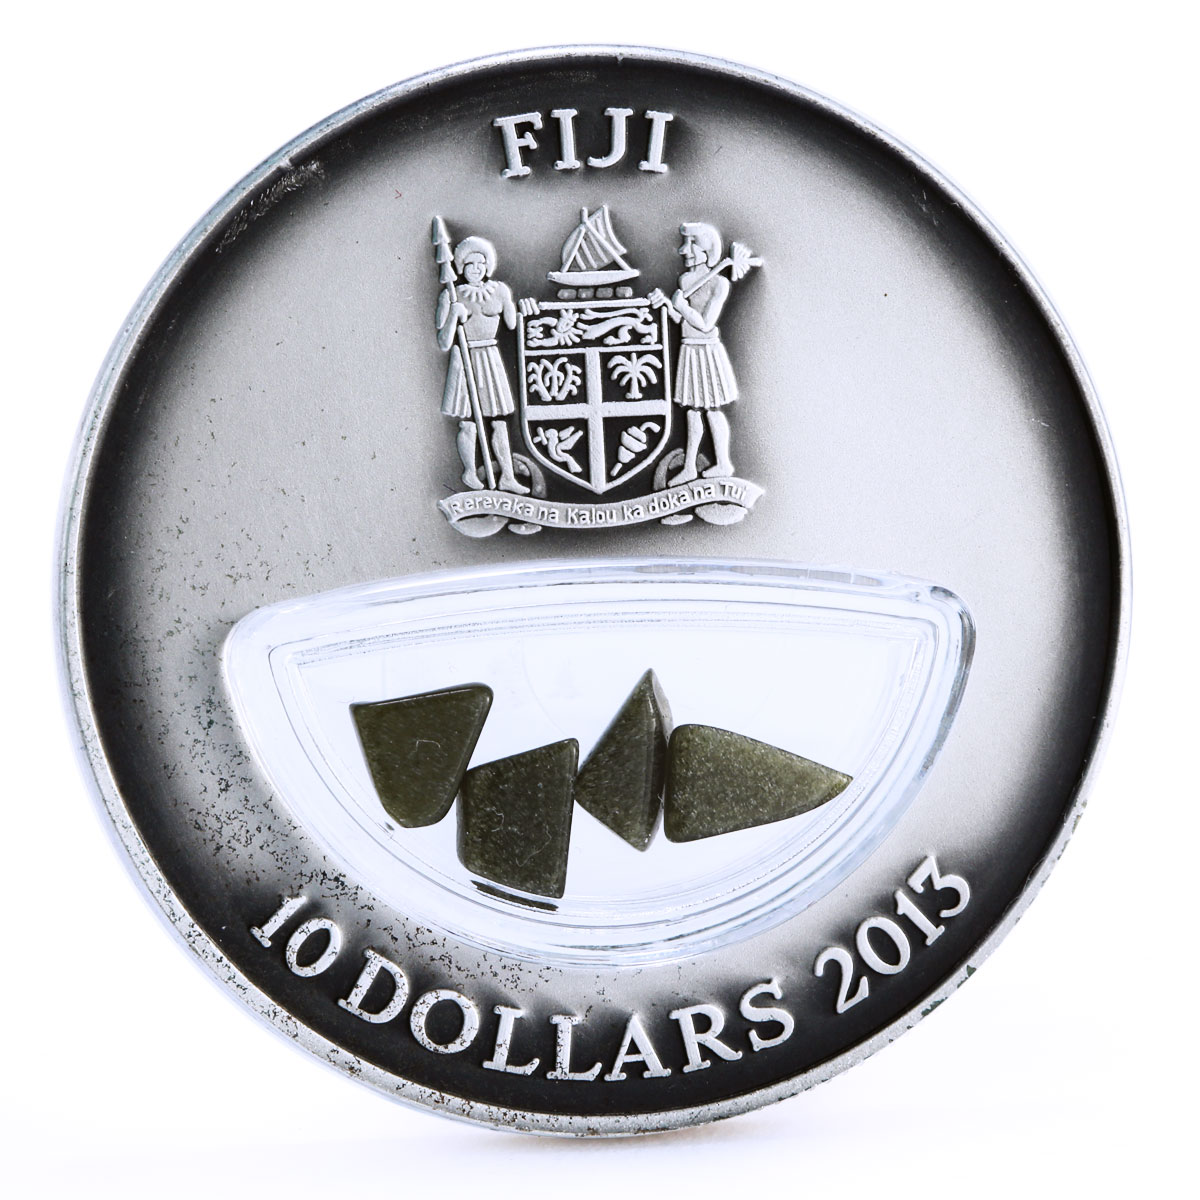 Fiji 10 dollars Volcanoes Breath of Fire St. Helens silver coin 2013